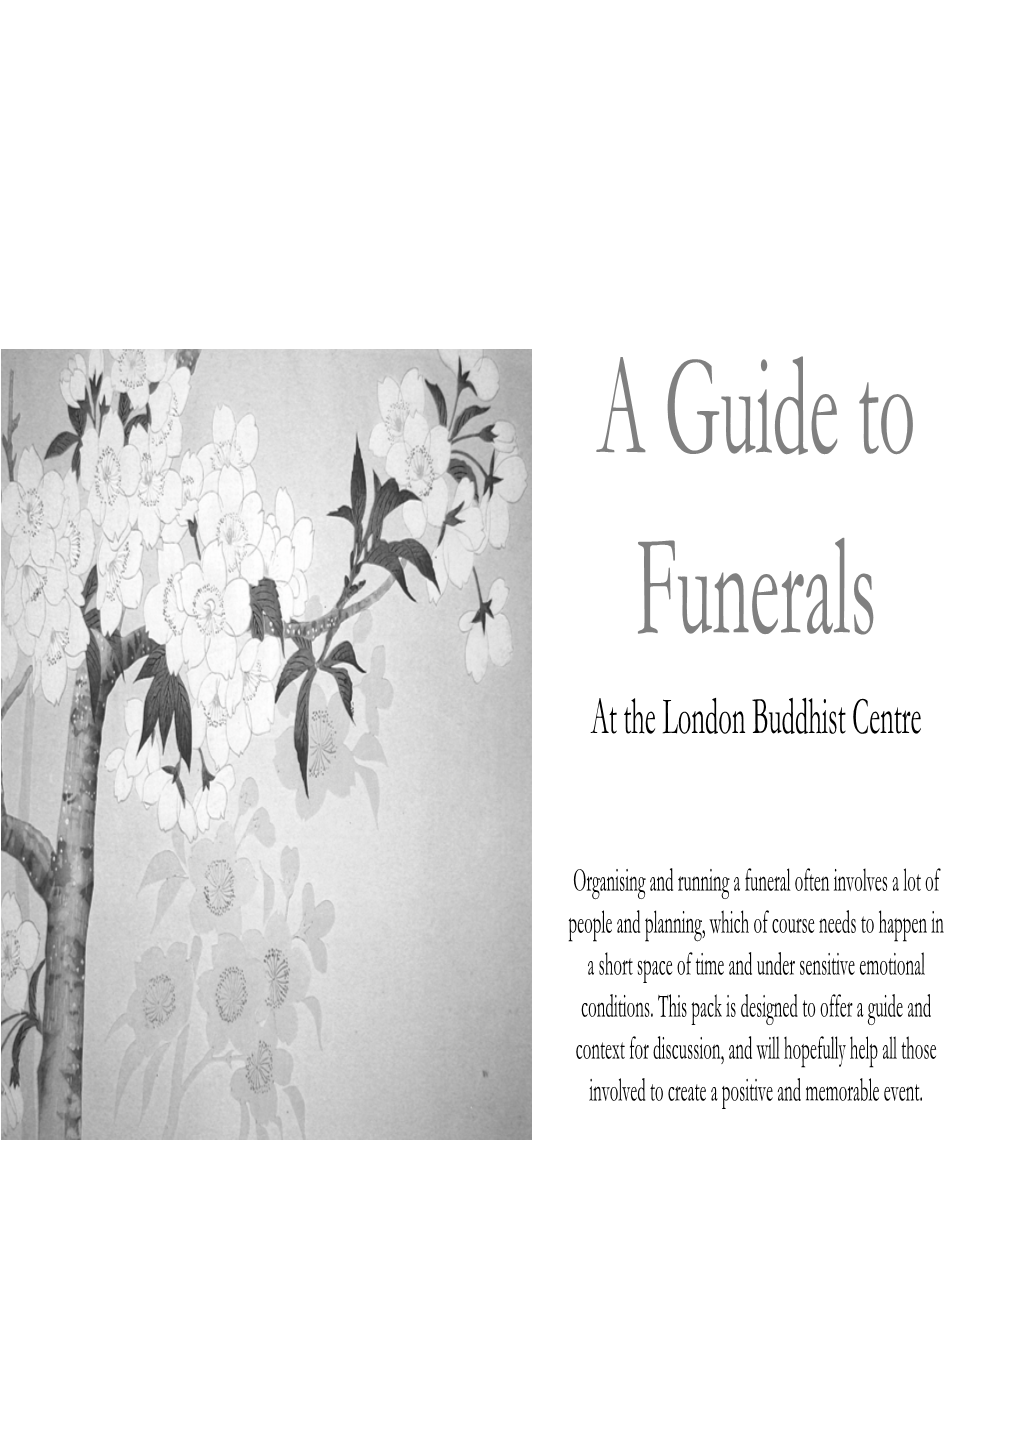 A Guide to Funerals at the London Buddhist Centre